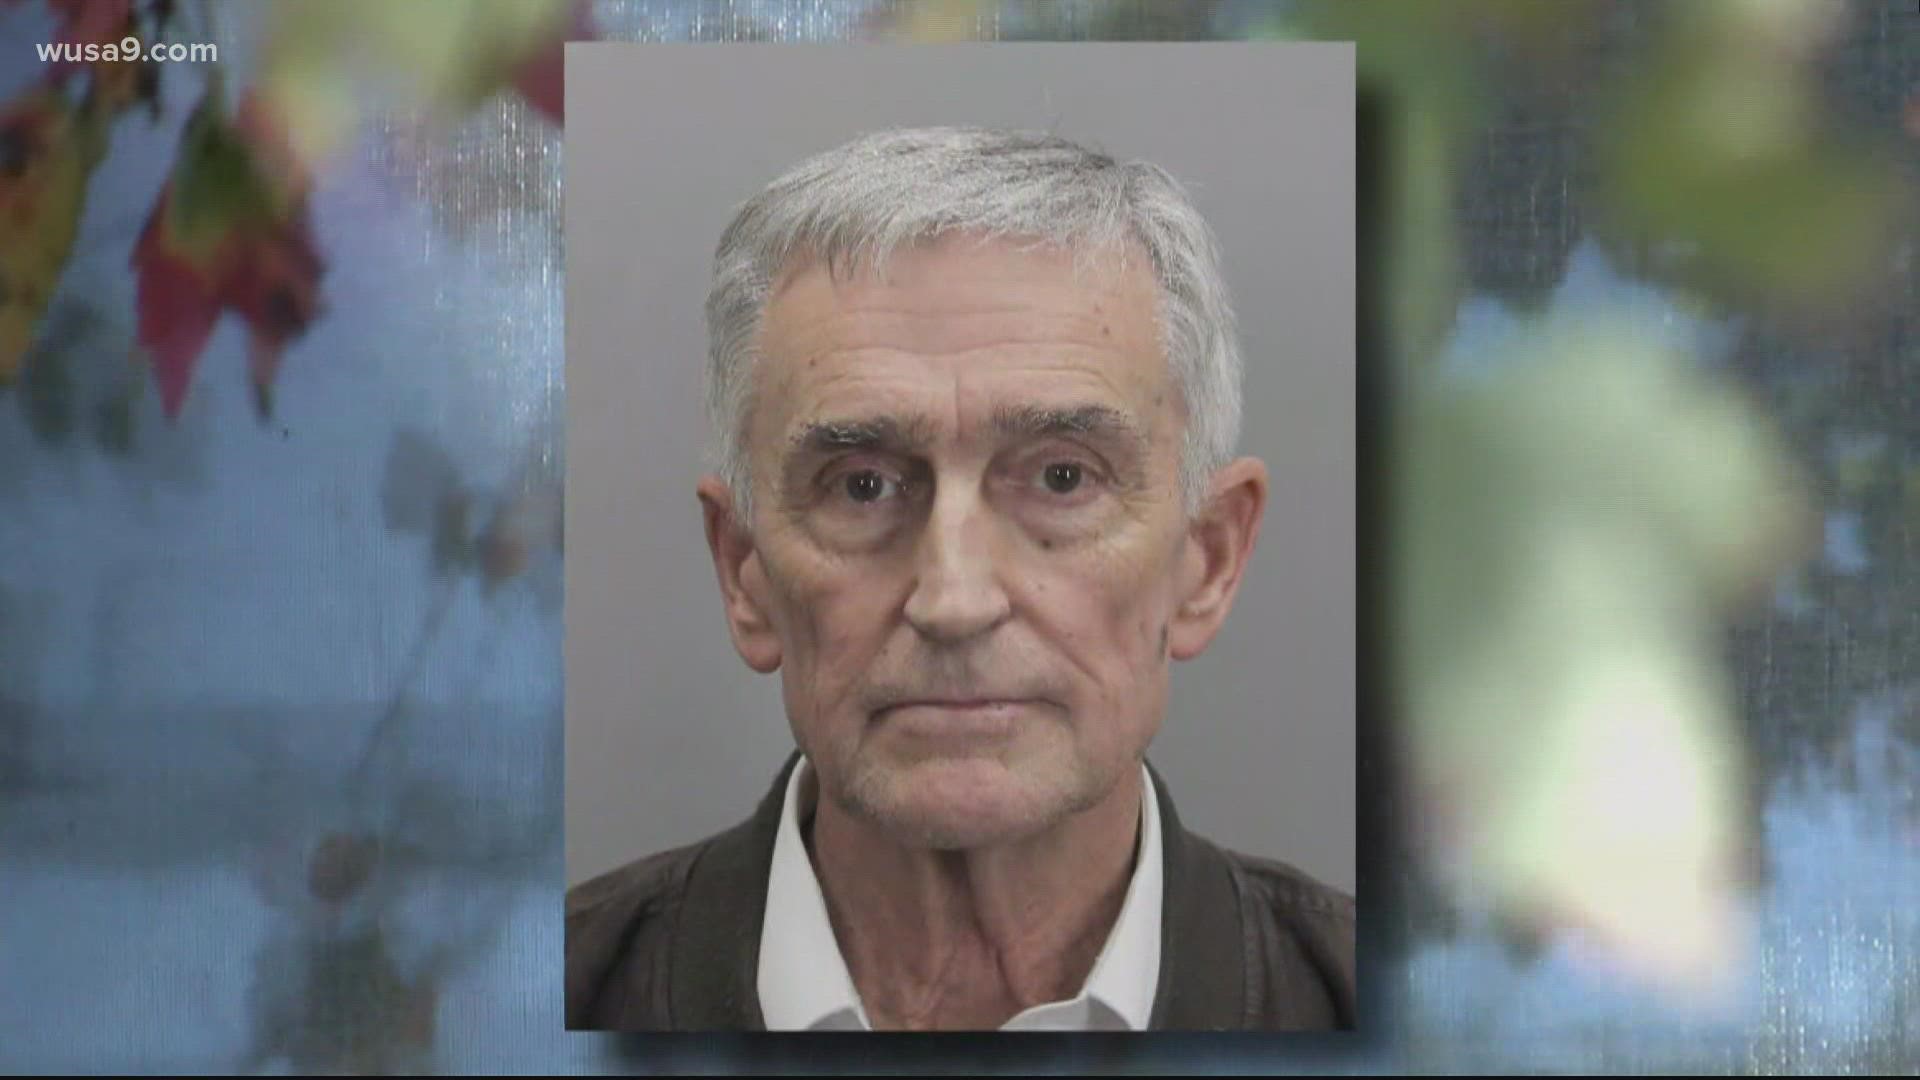 Police have arrested a 75-year-old man for sexually assaulting minors at his McLean, Va. home.